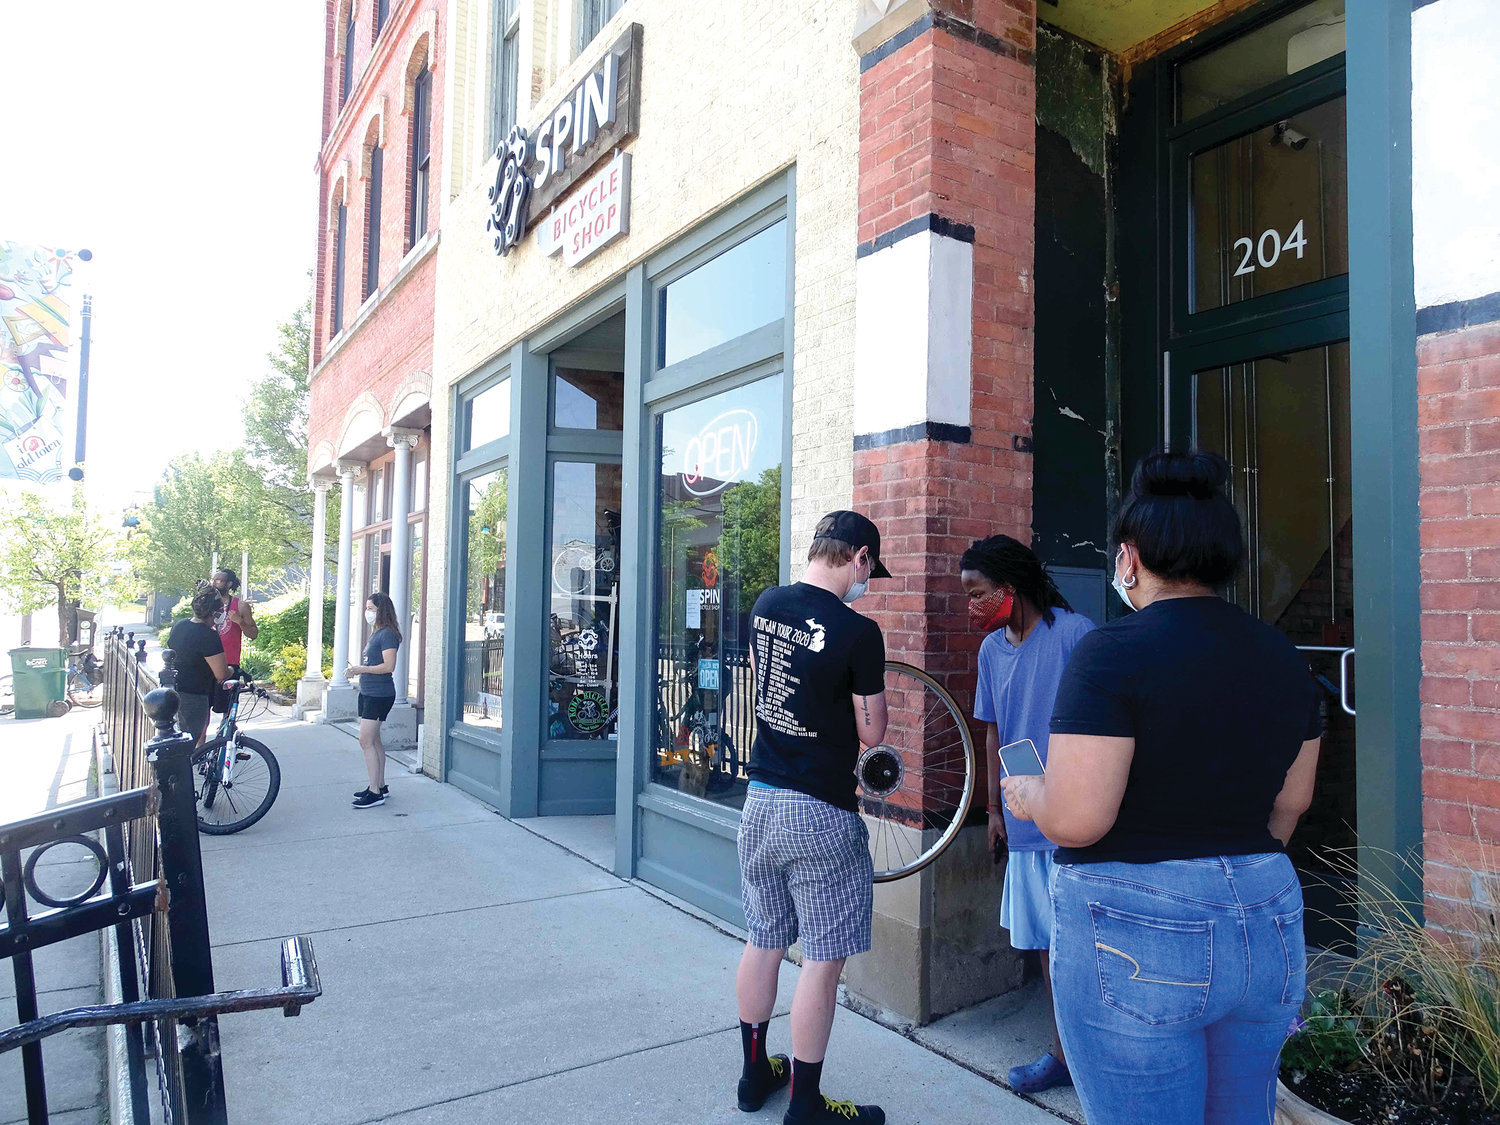 Staffers were busy helping a constant stream of socially distancing customers outside  Spin Bicycle Shop in Old Town Tuesday.